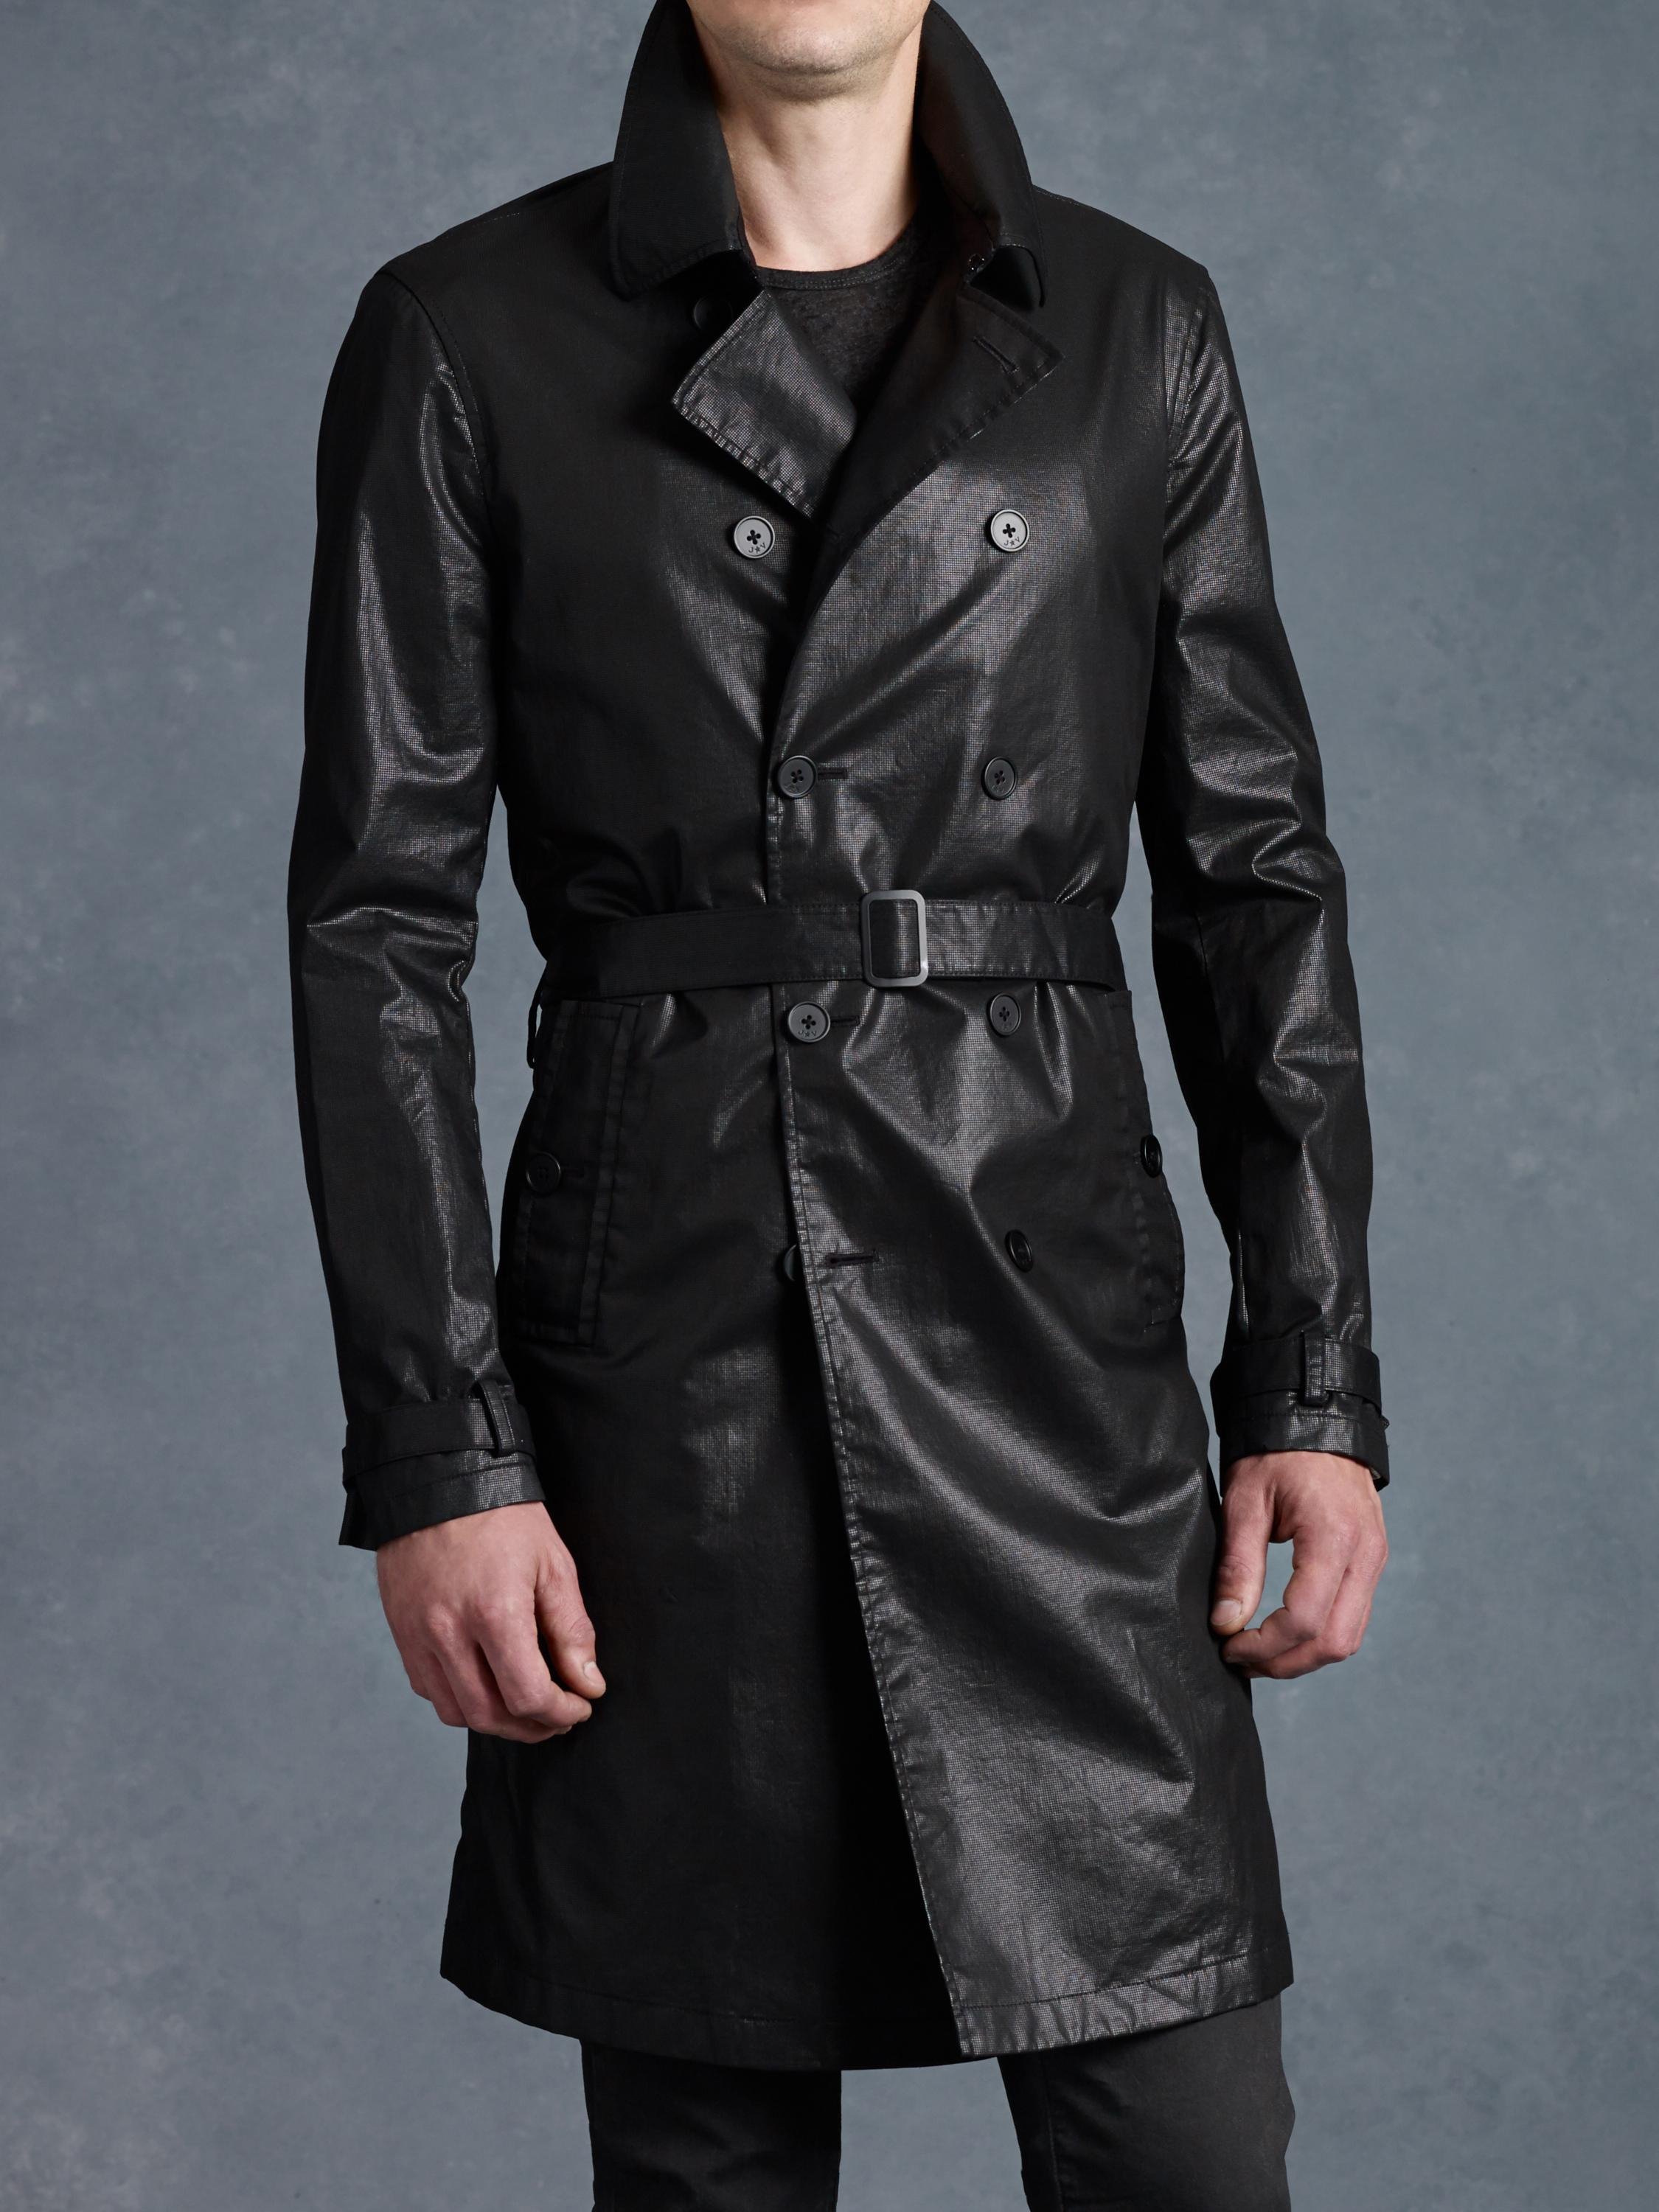 John Varvatos Double Breasted Trench Coat in Black for Men - Lyst